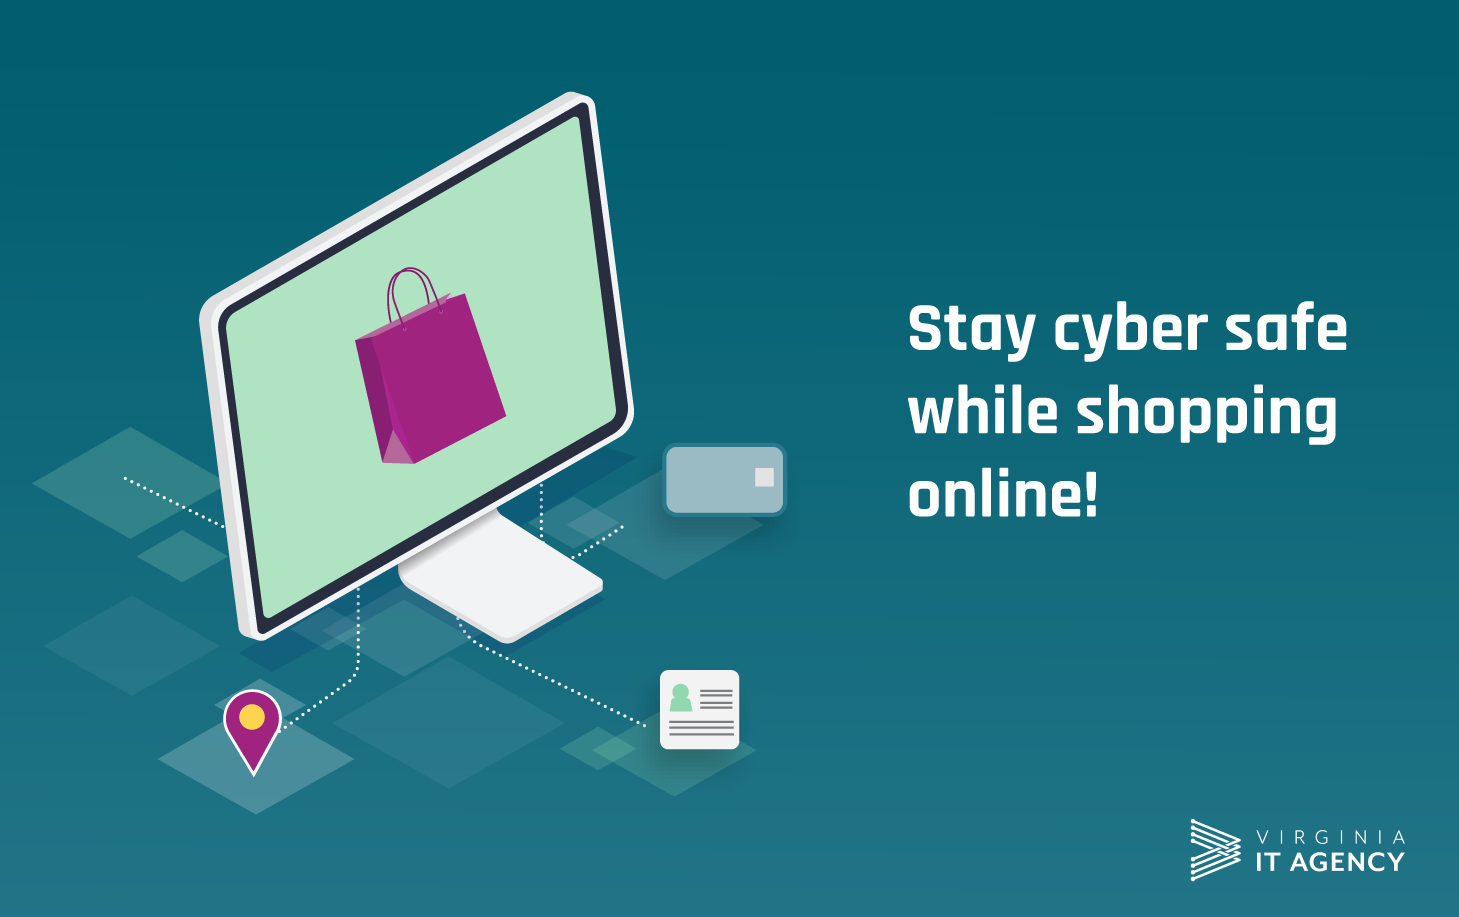 News 2022 online shopping safety tips